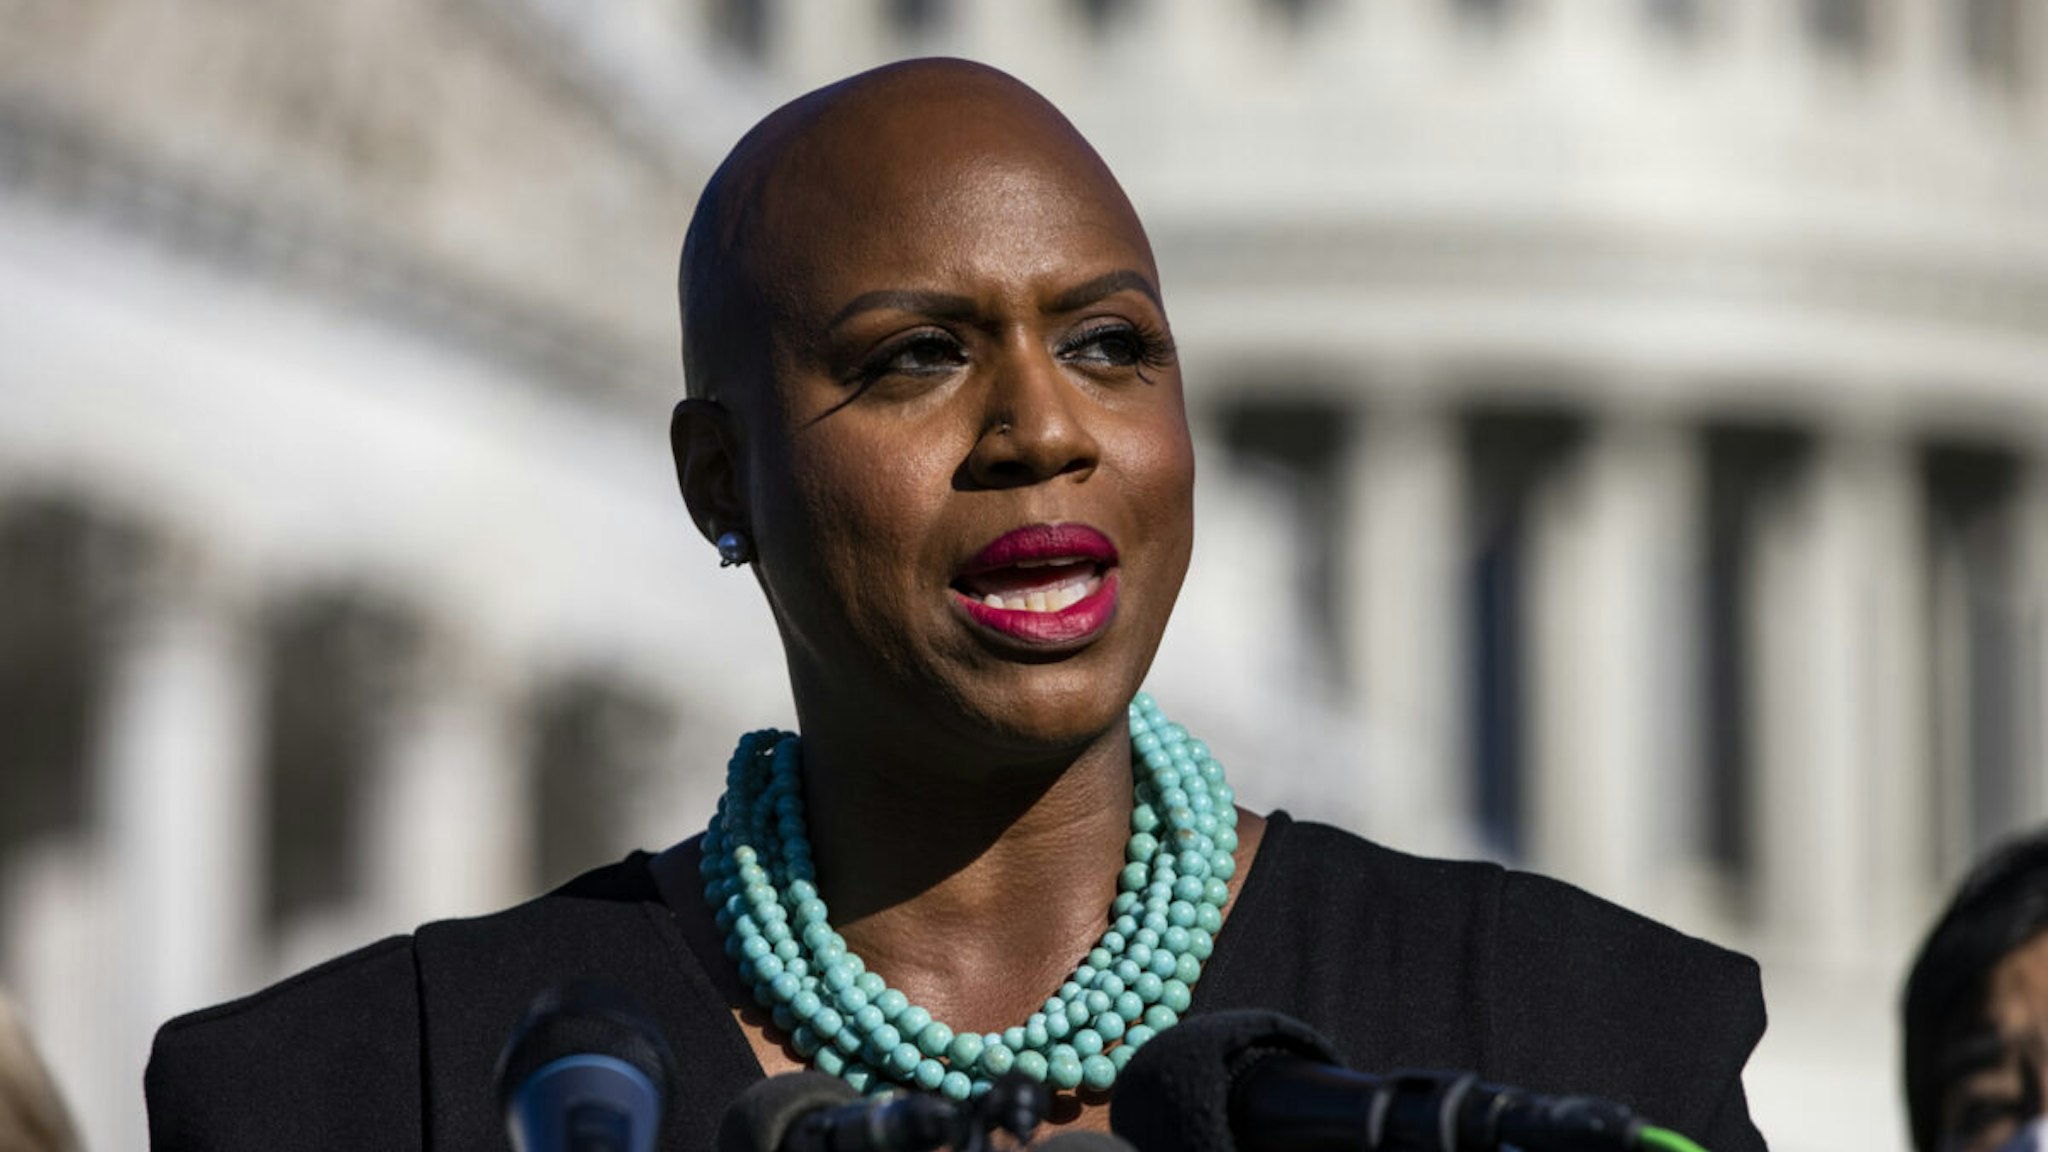 Representative Ayanna Pressley, a Democrat from Massachusetts, speaks during a news conference ahead of a vote on the Women's Health Protection Act outside the U.S. Capitol in Washington, D.C., U.S., on Friday, Sept. 24, 2021.